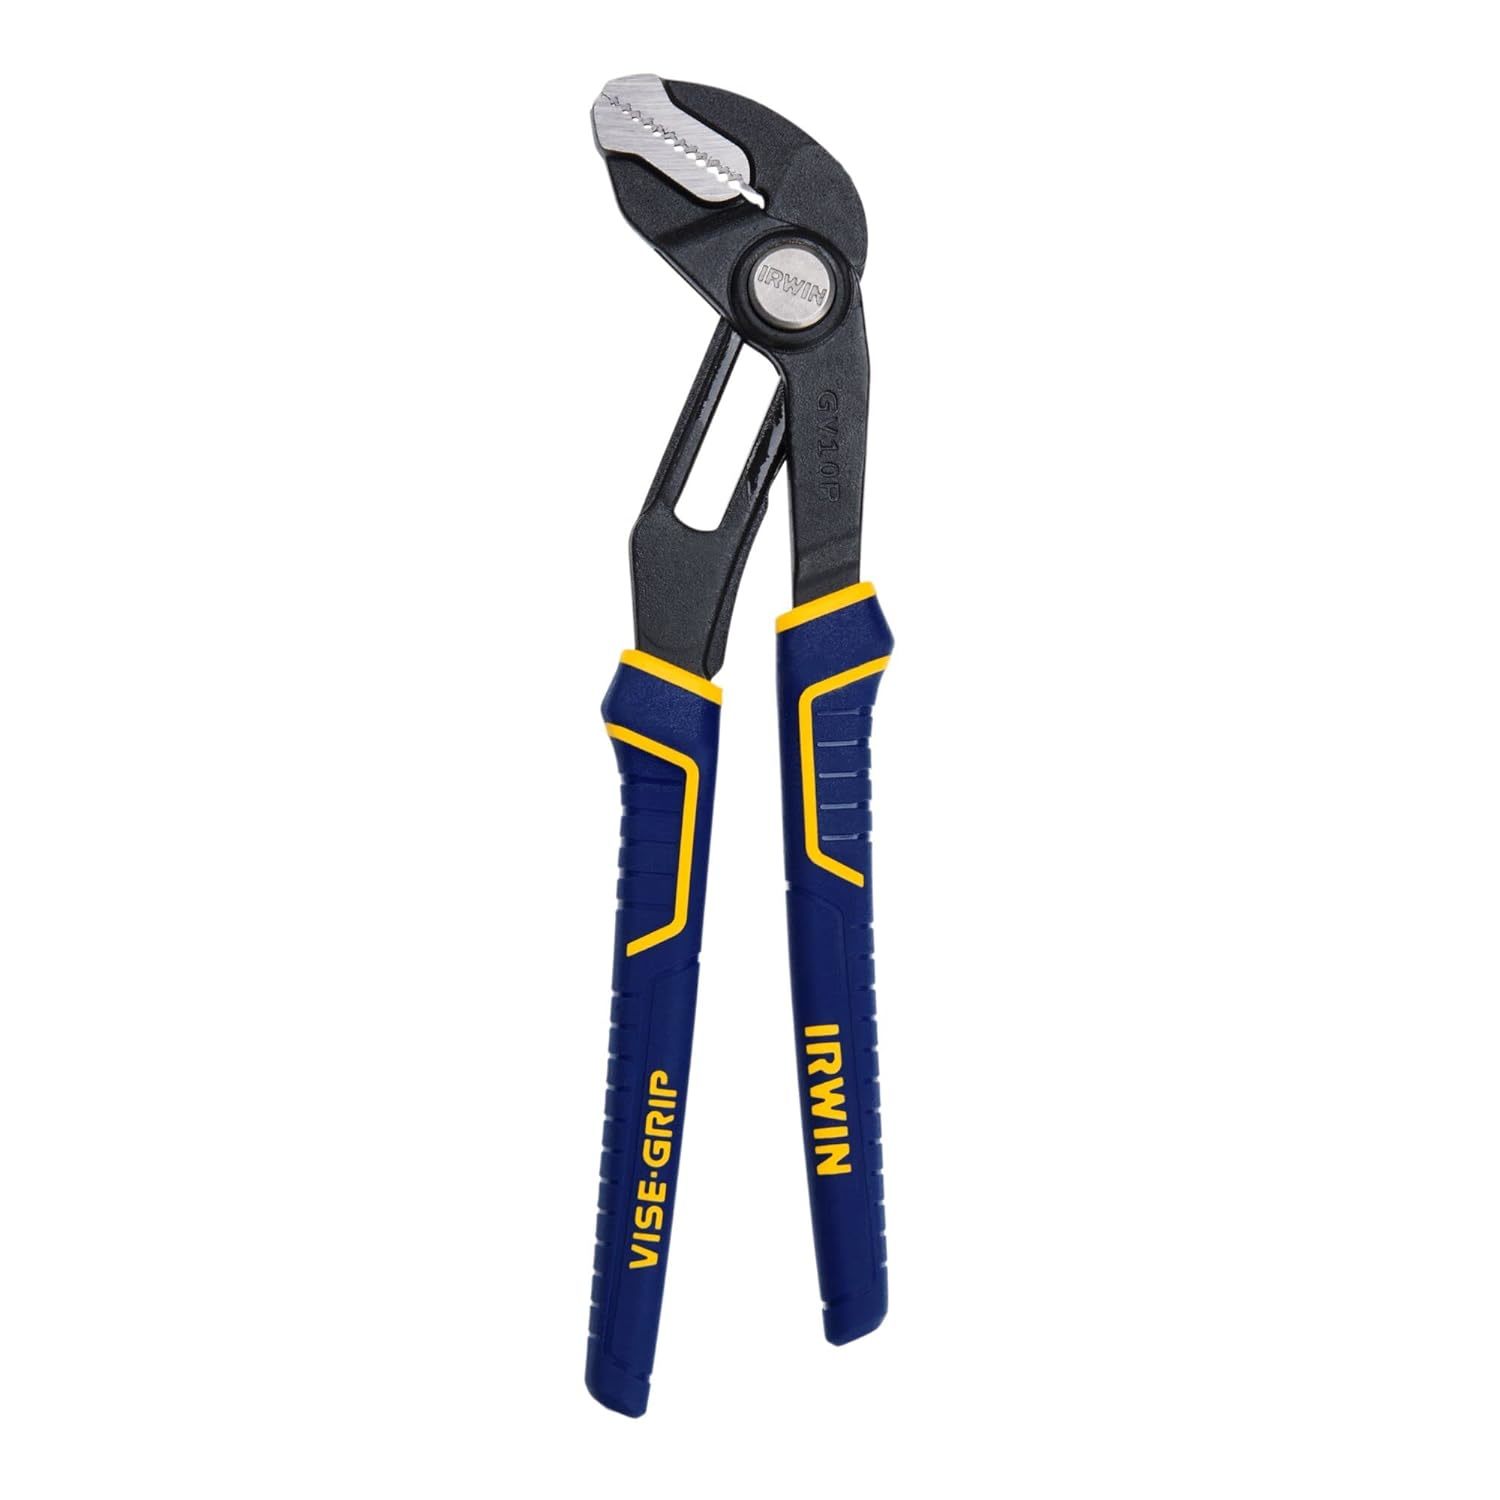 IRWIN Tools VISE-GRIP Pliers, Needle Nose with Spring, 5-1/2-Inch (2078955)